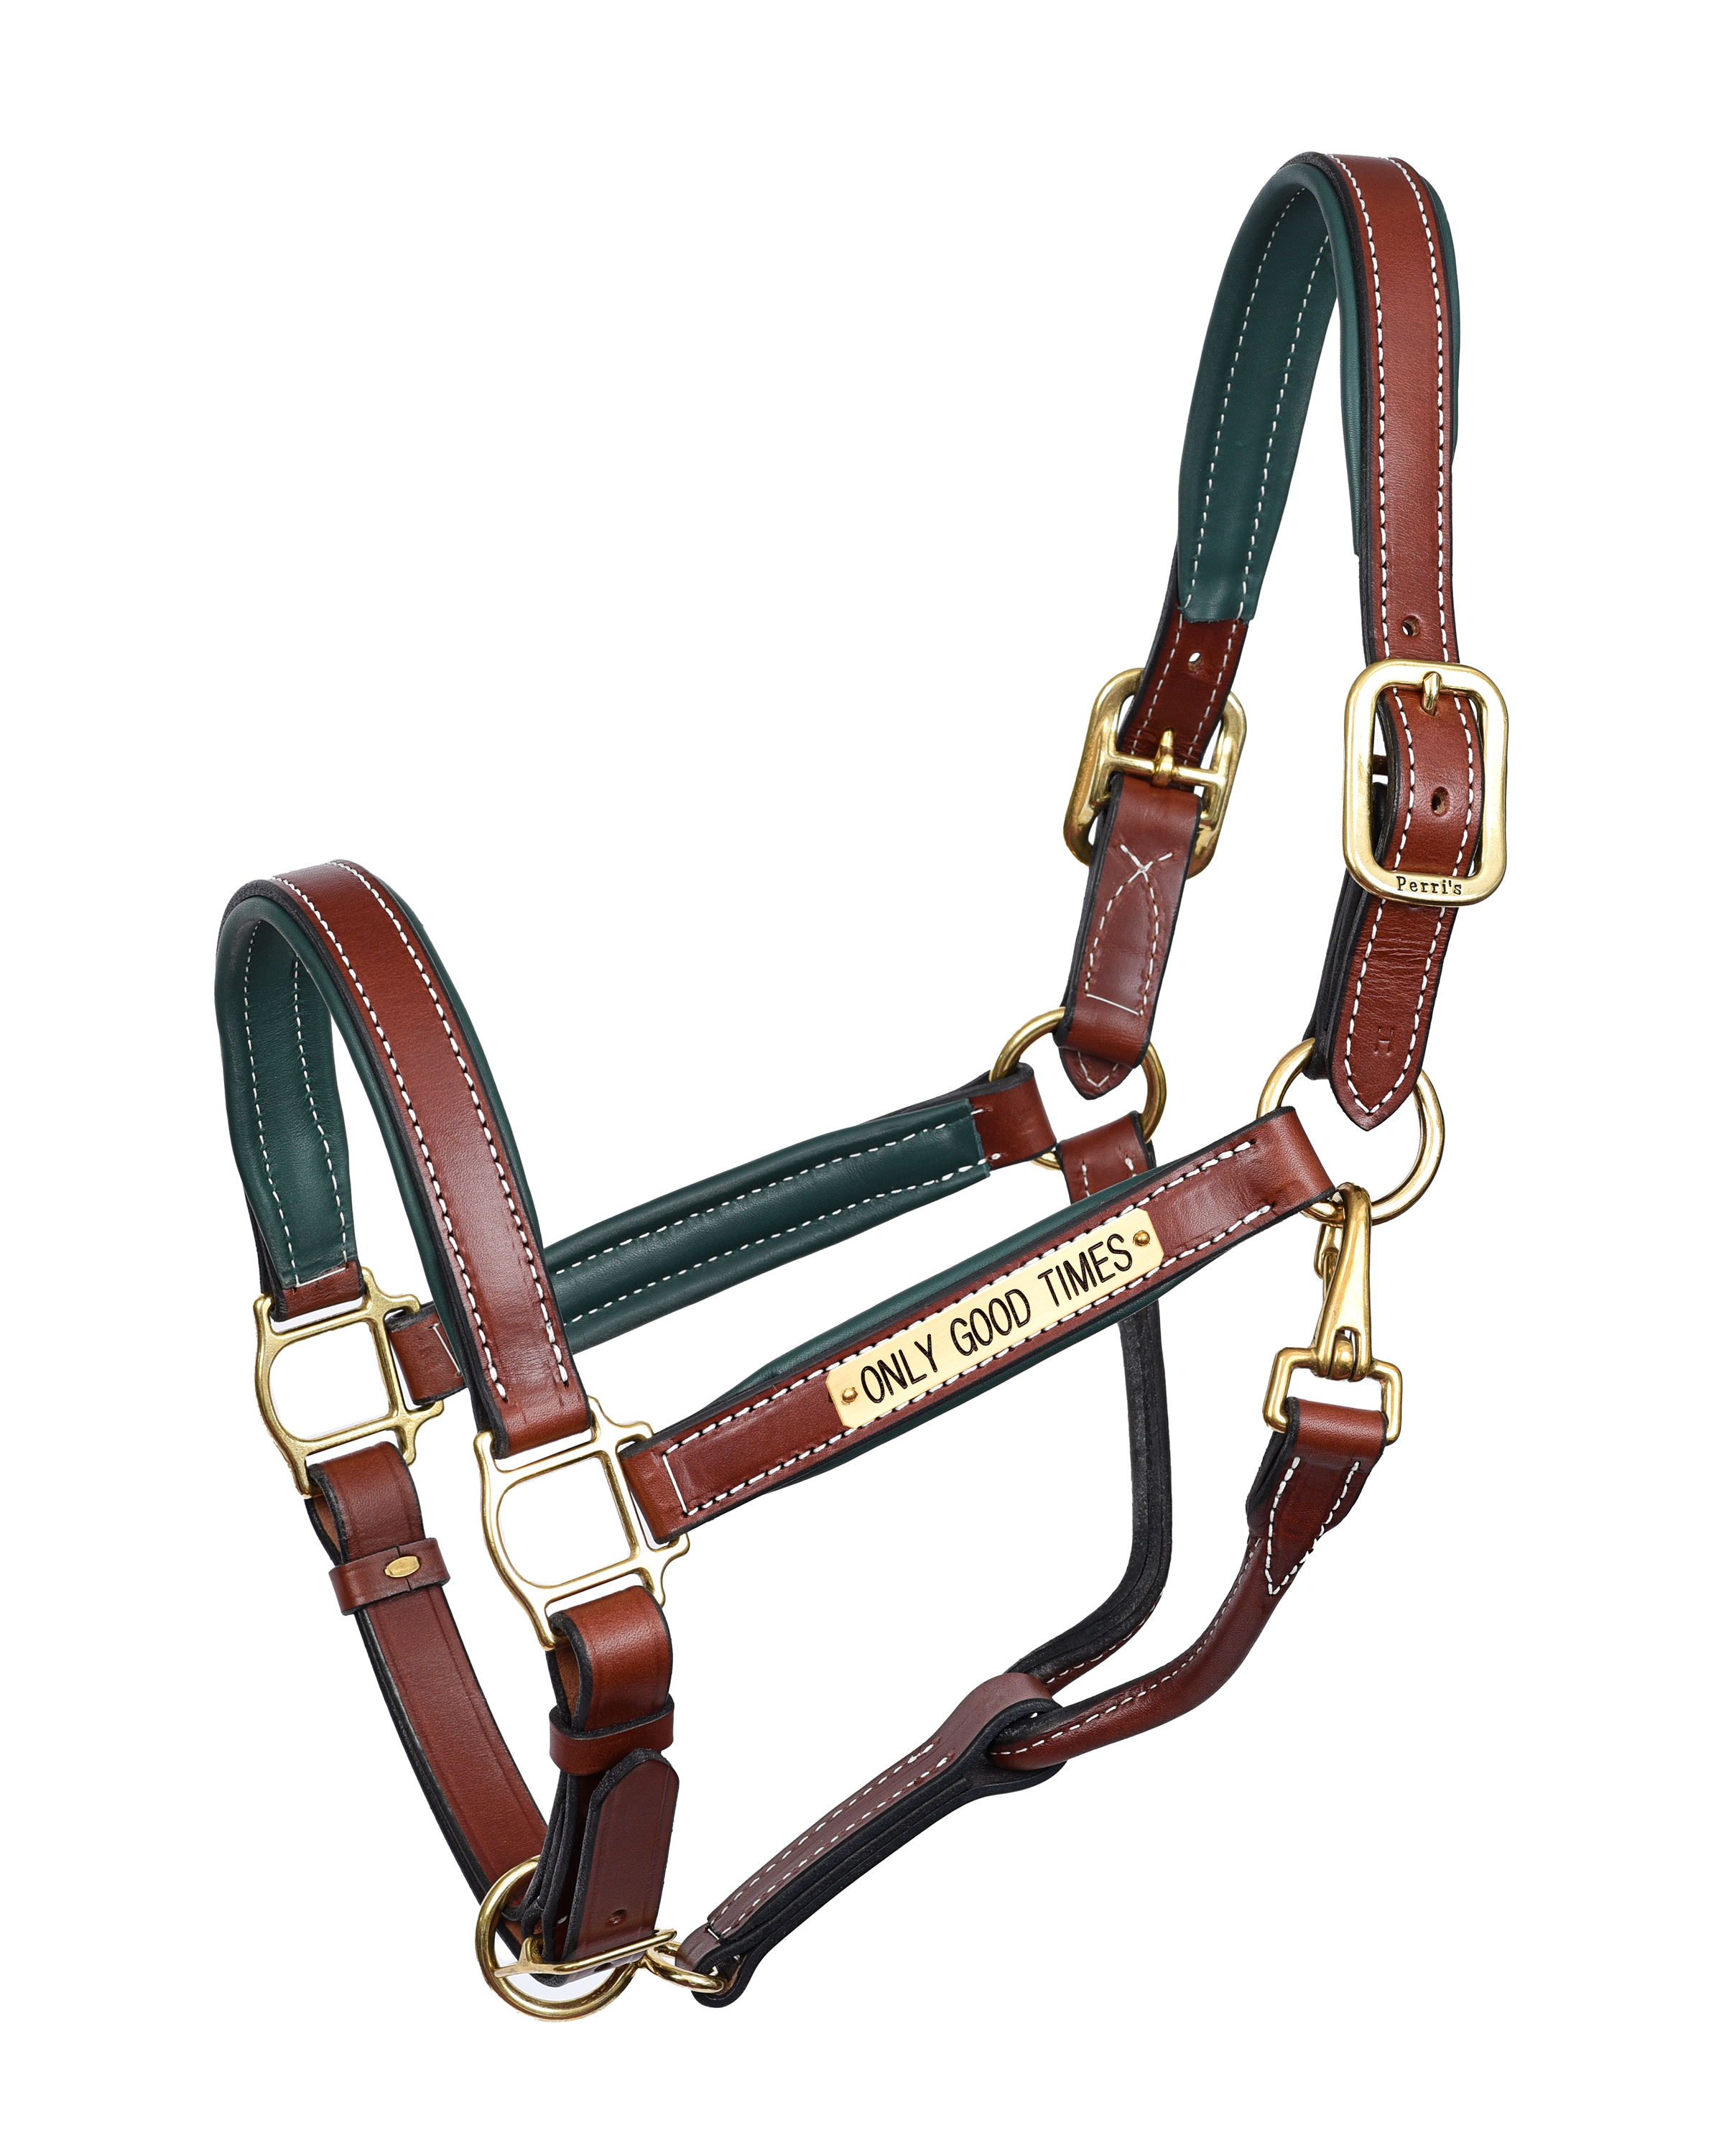 COB CHEST / HUNTER PAD LEATHER HALTER W / PLATE